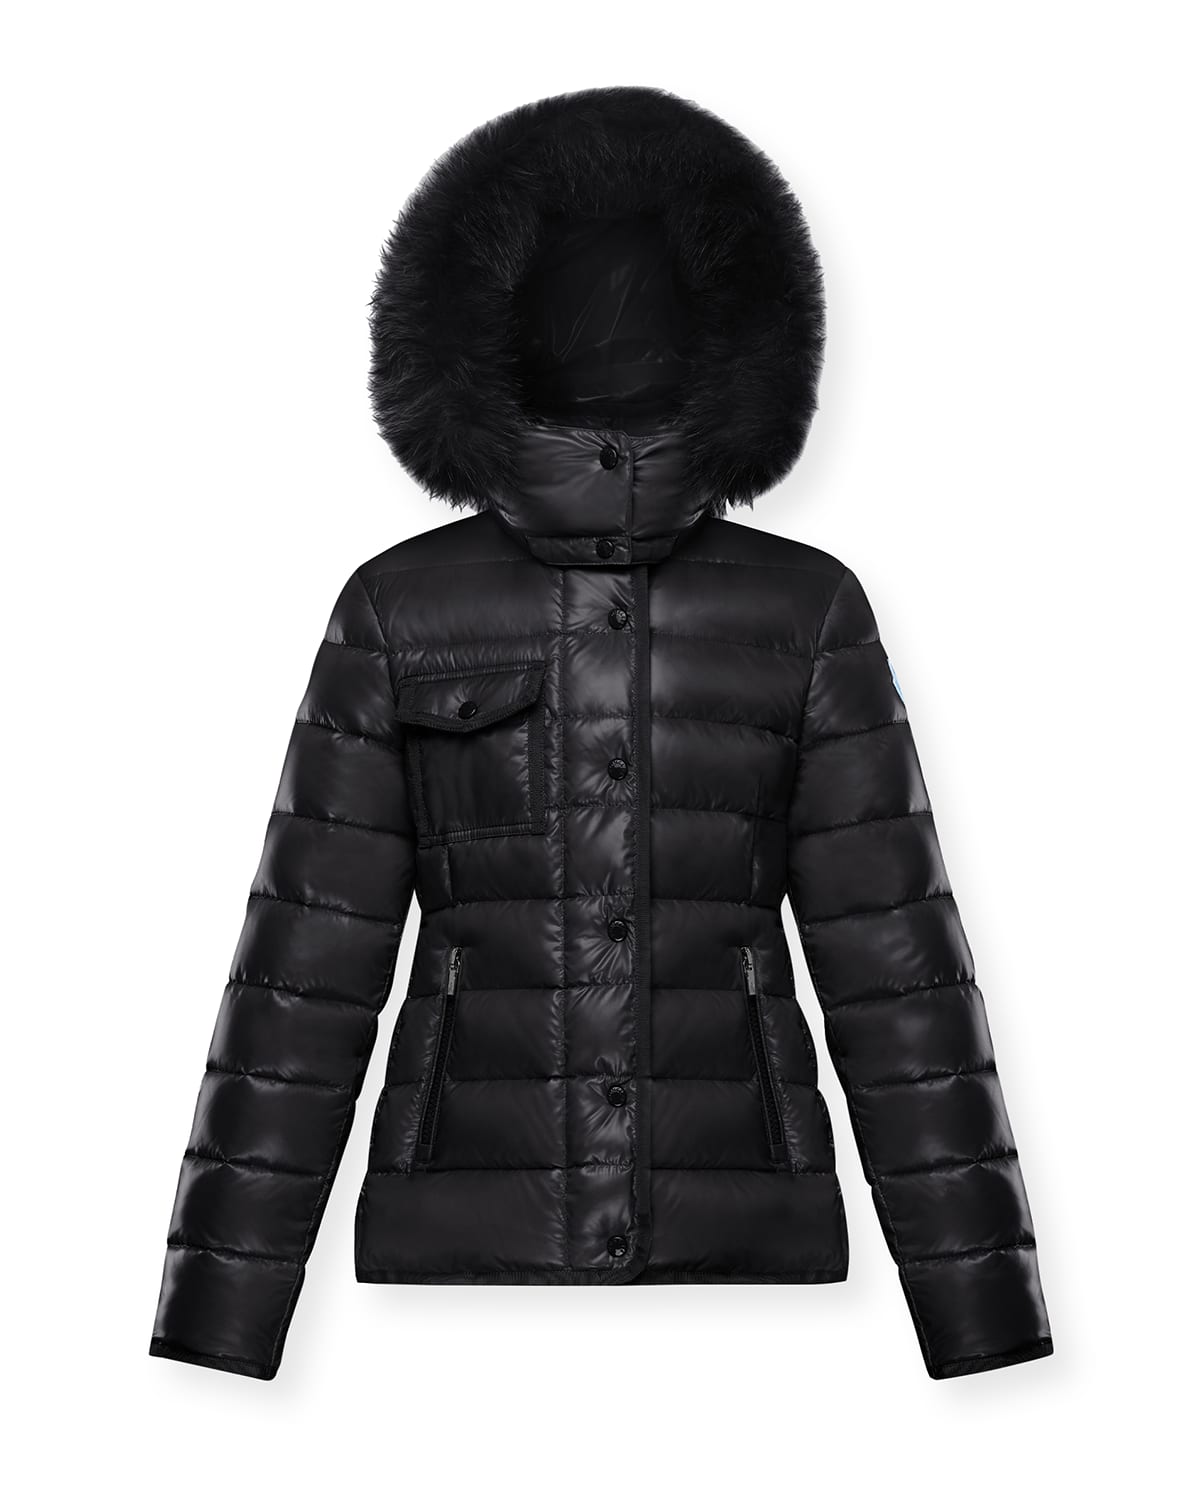 MONCLER GIRL'S ARMOISE FUR-TRIM QUILTED JACKET,PROD244710031